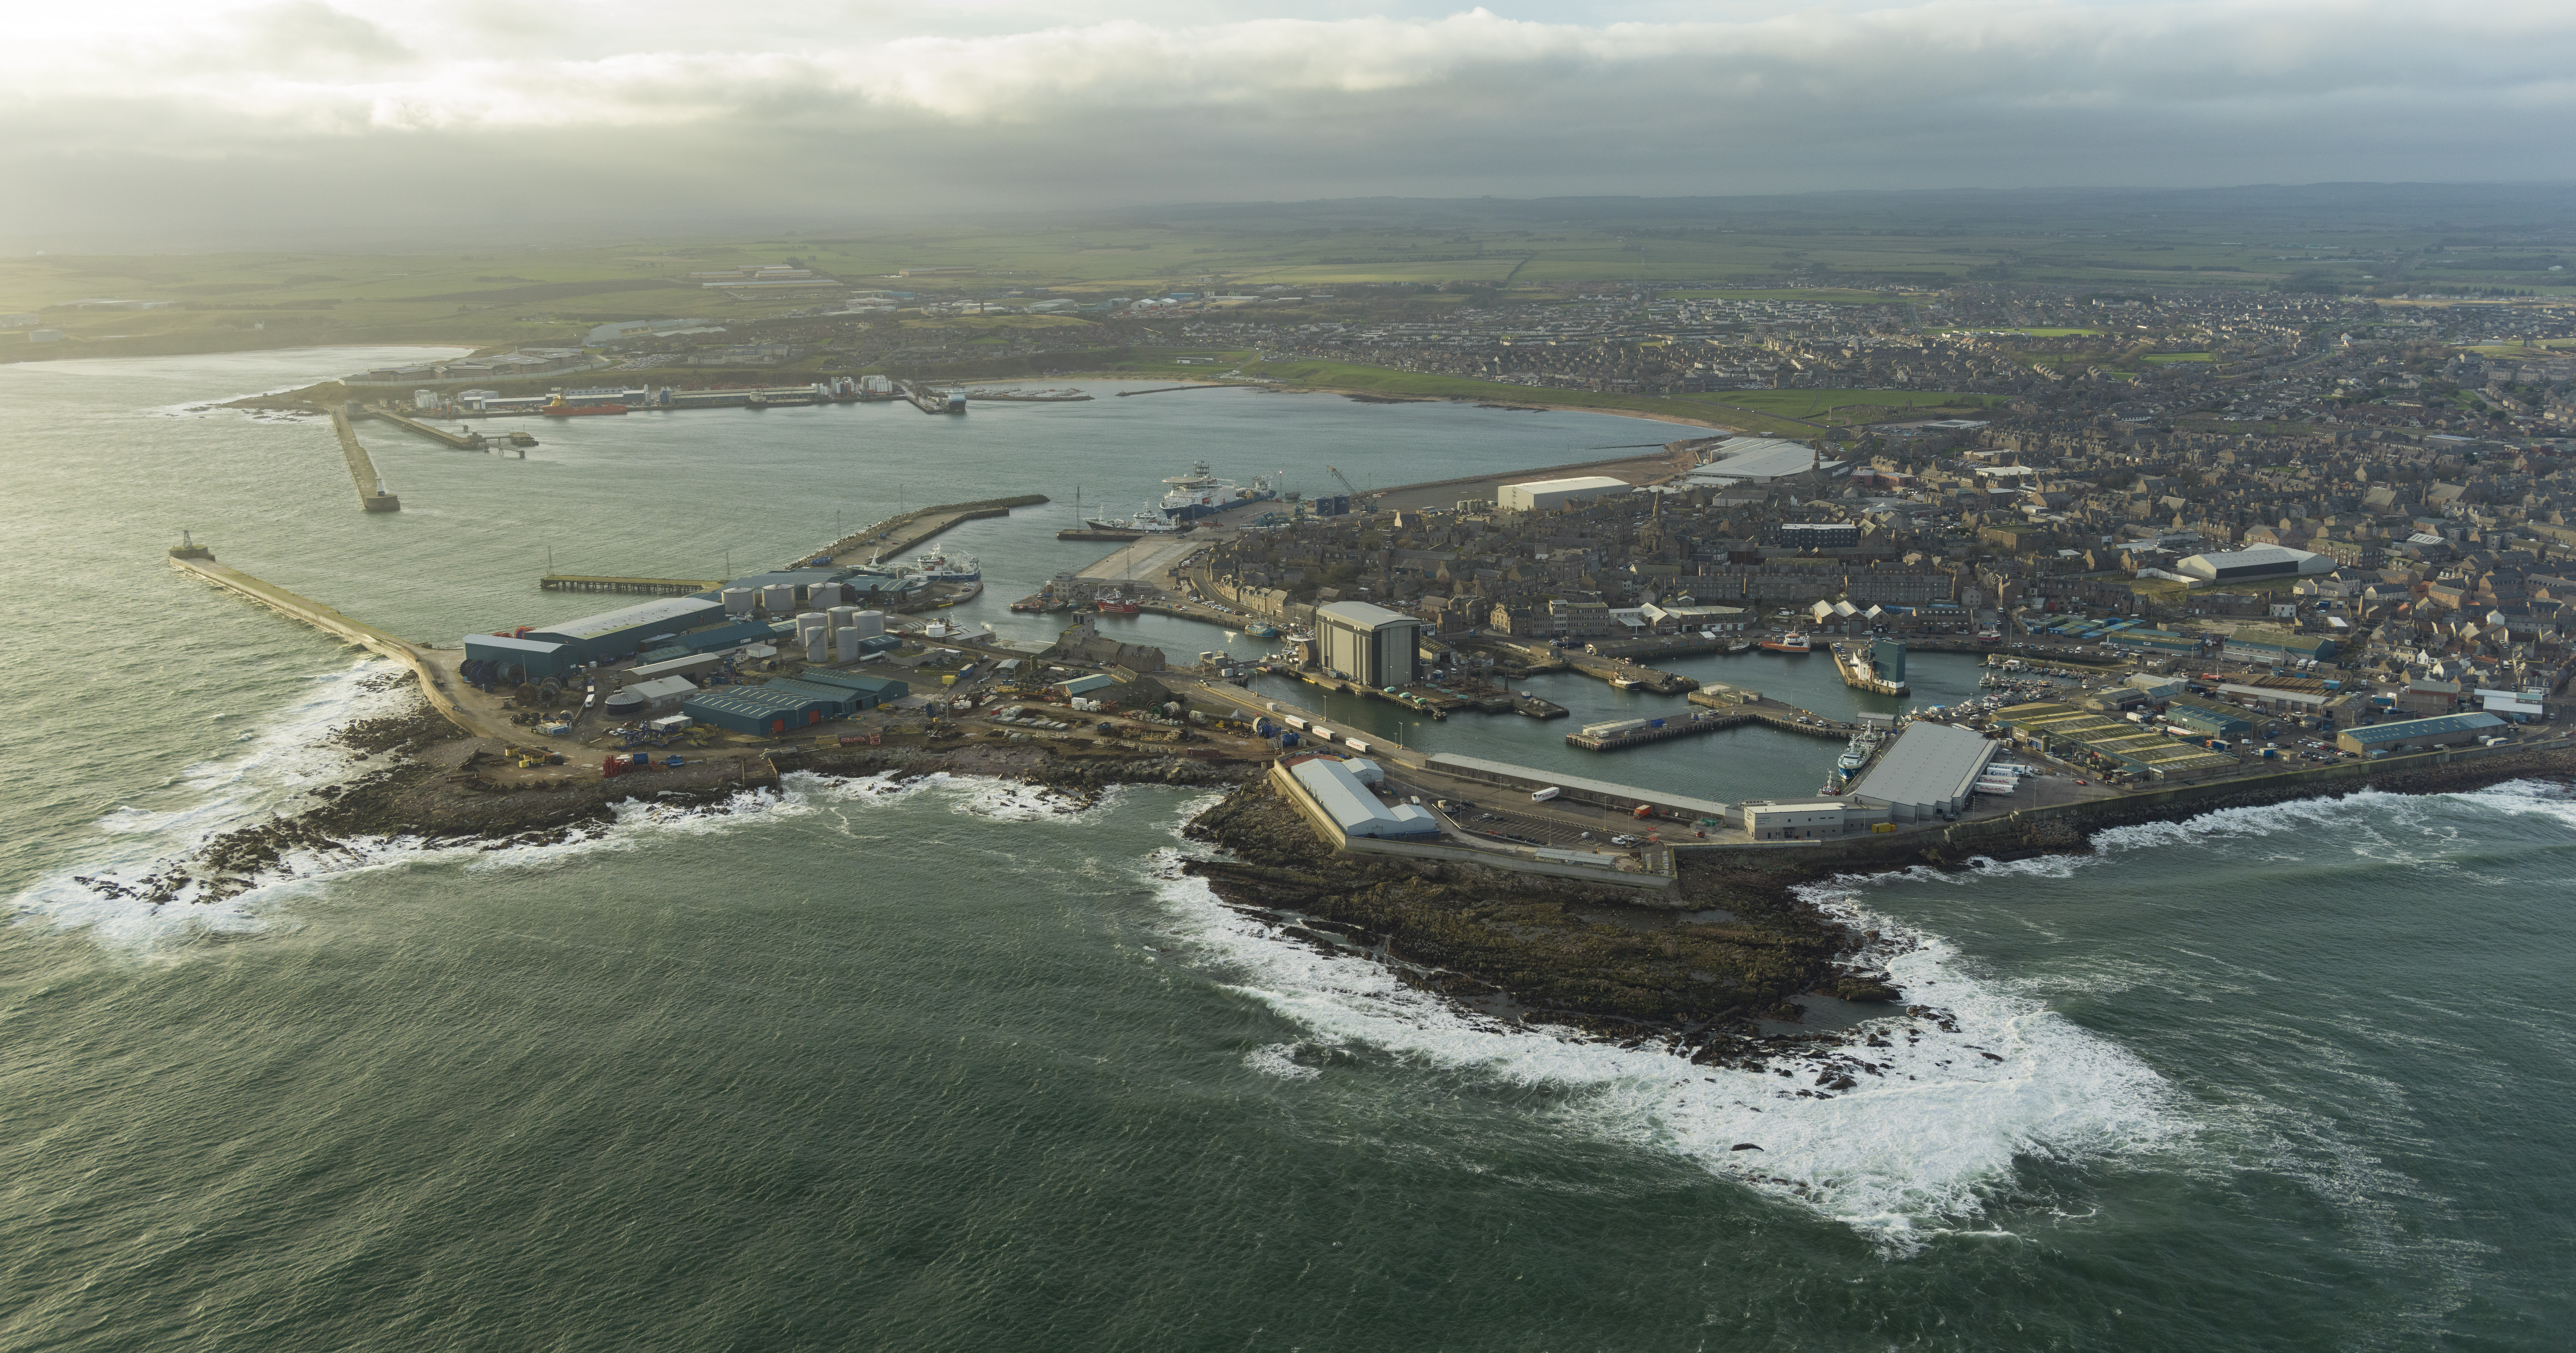 Peterhead port from the air.